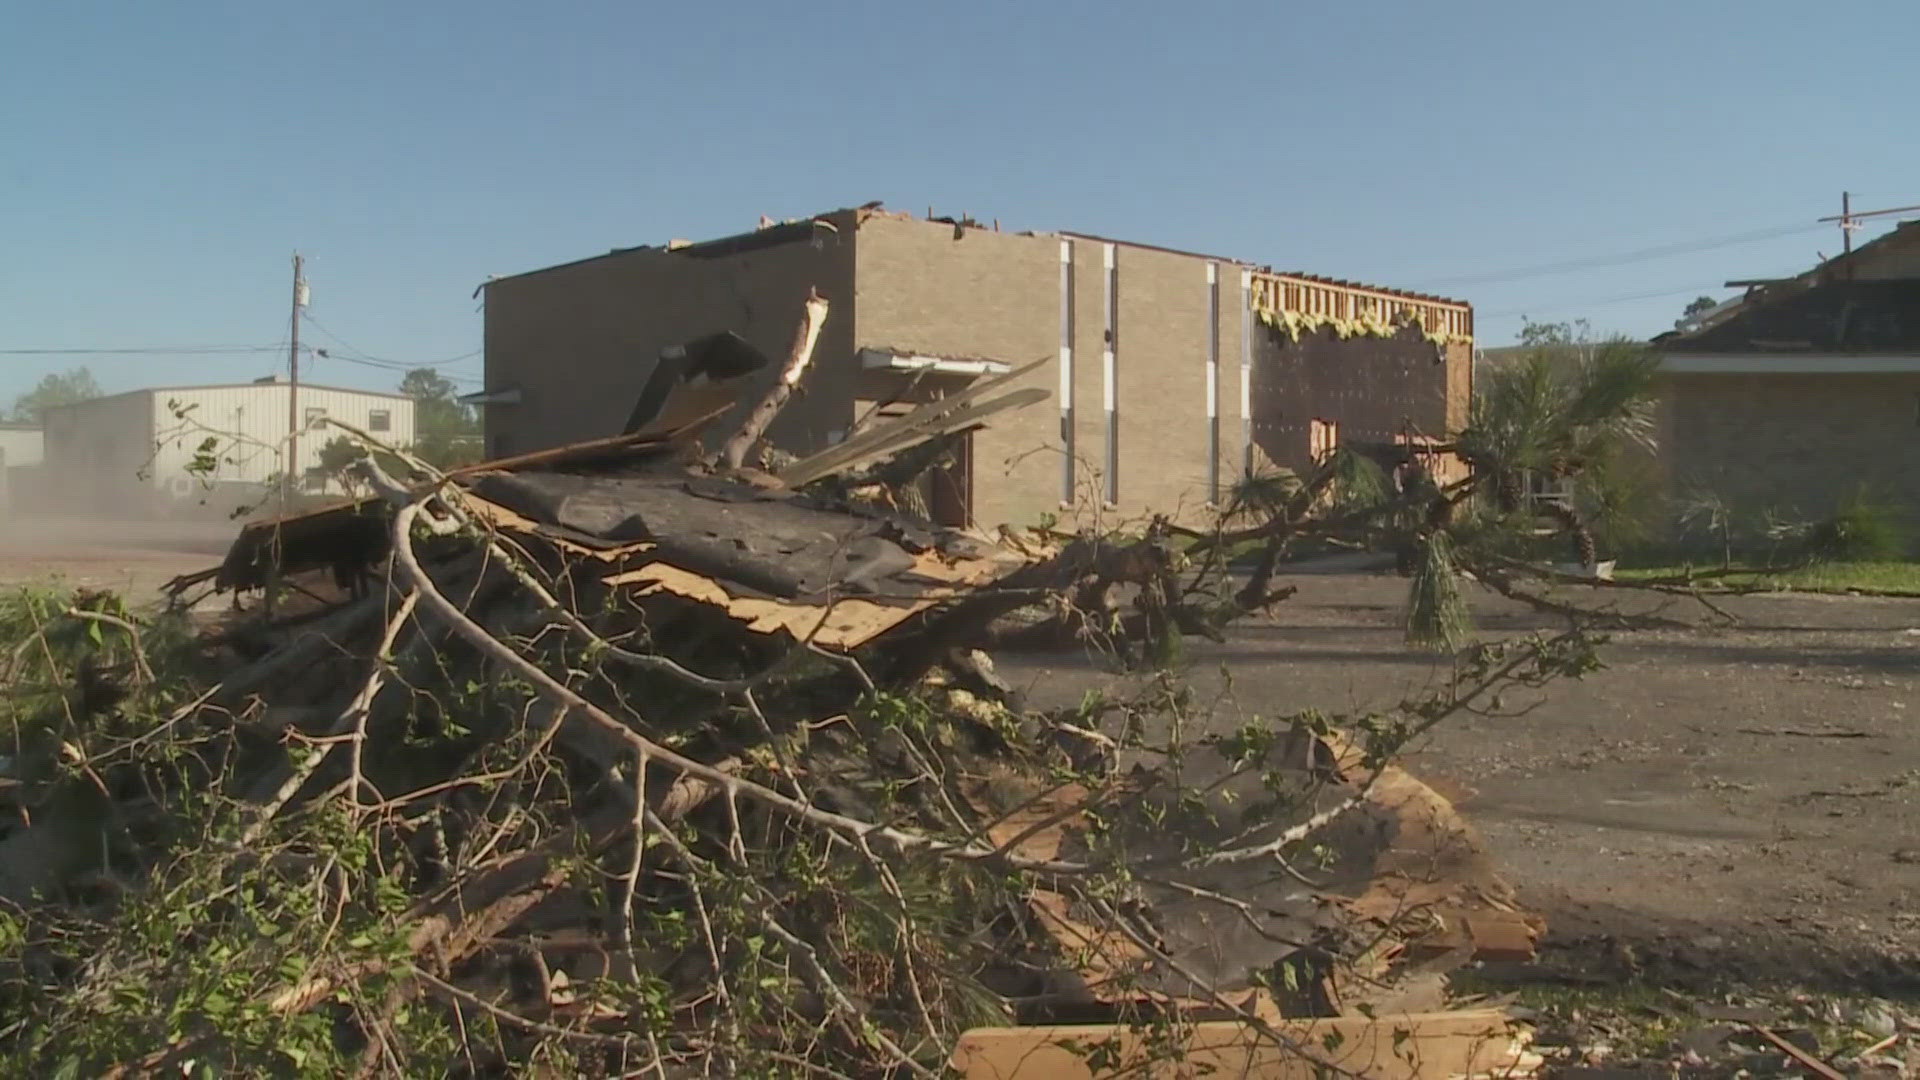 Just over one month after a powerful tornado ripped through Slidell, the city was preparing for potential severe weather Monday night.